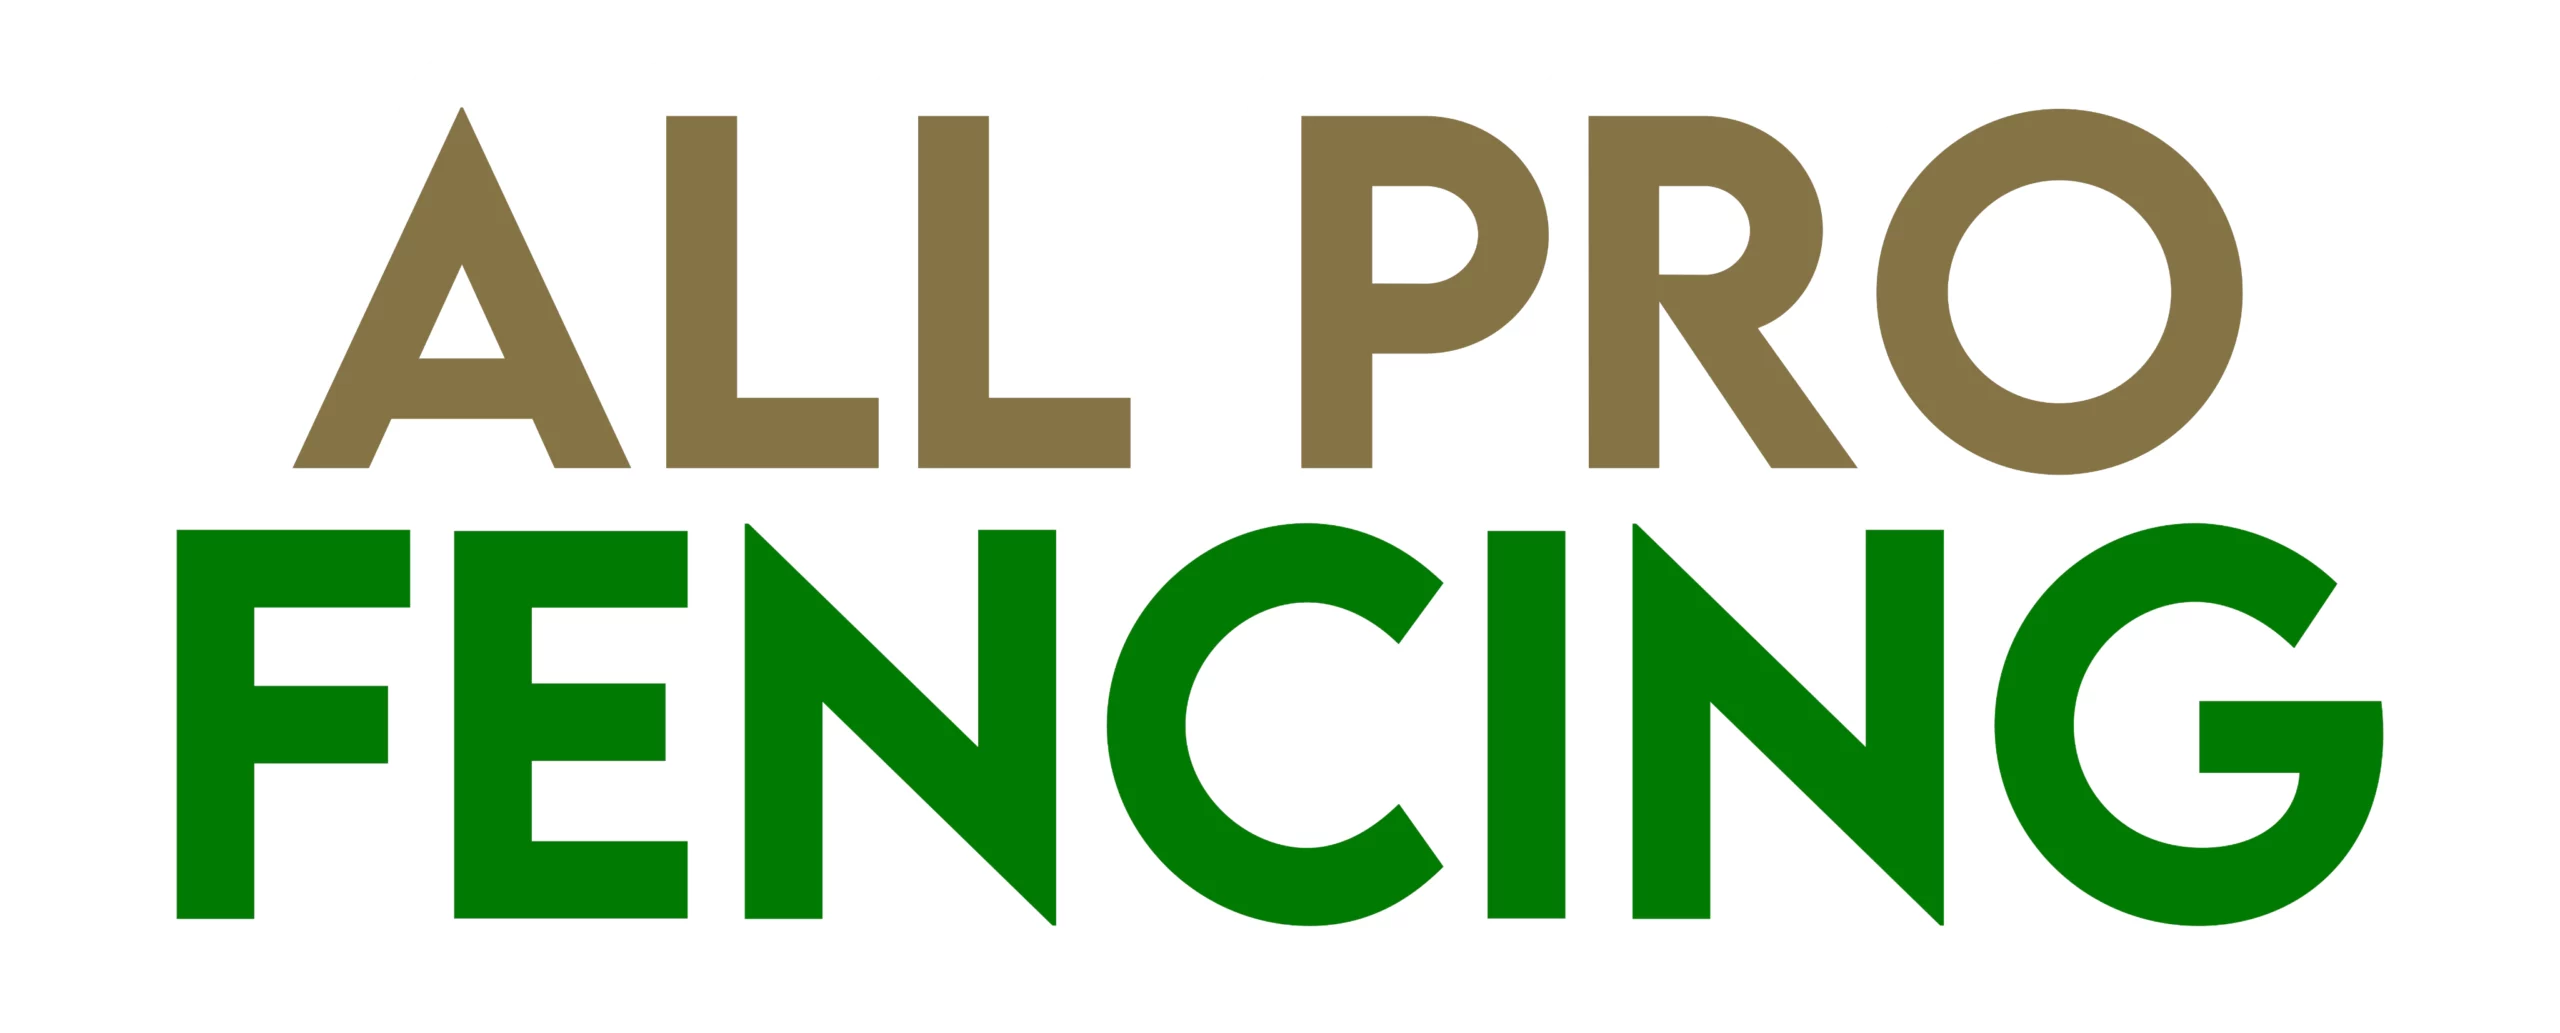 All-Pro-Fencing-Logo-with-stroke